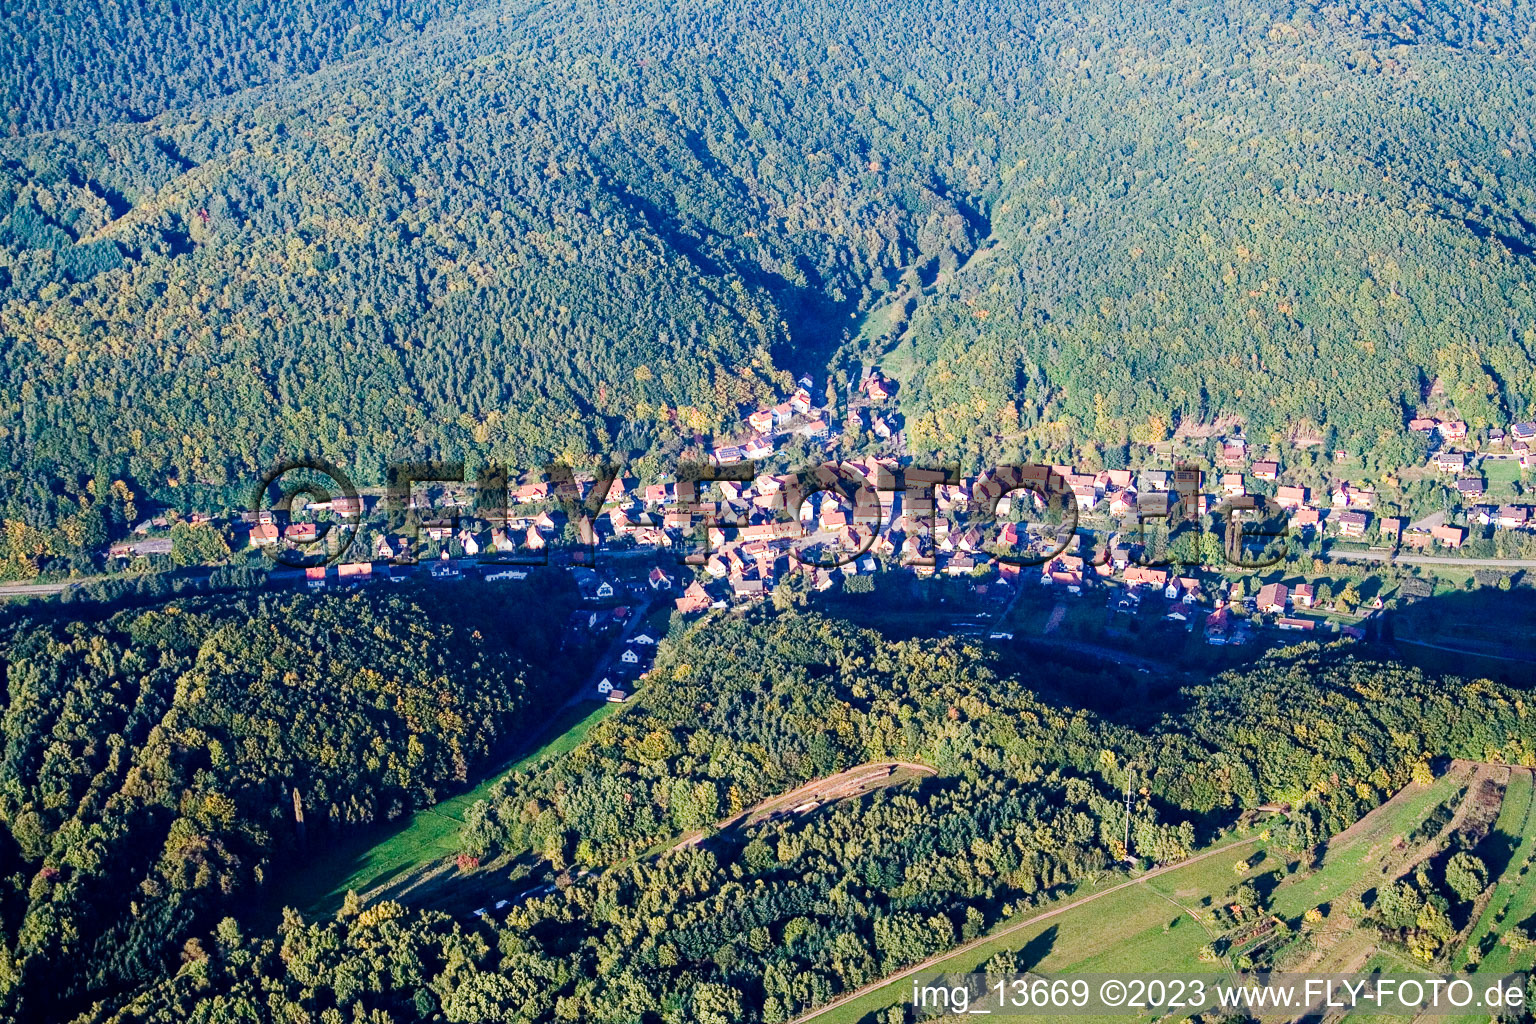 Waldrohrbach in the state Rhineland-Palatinate, Germany from above